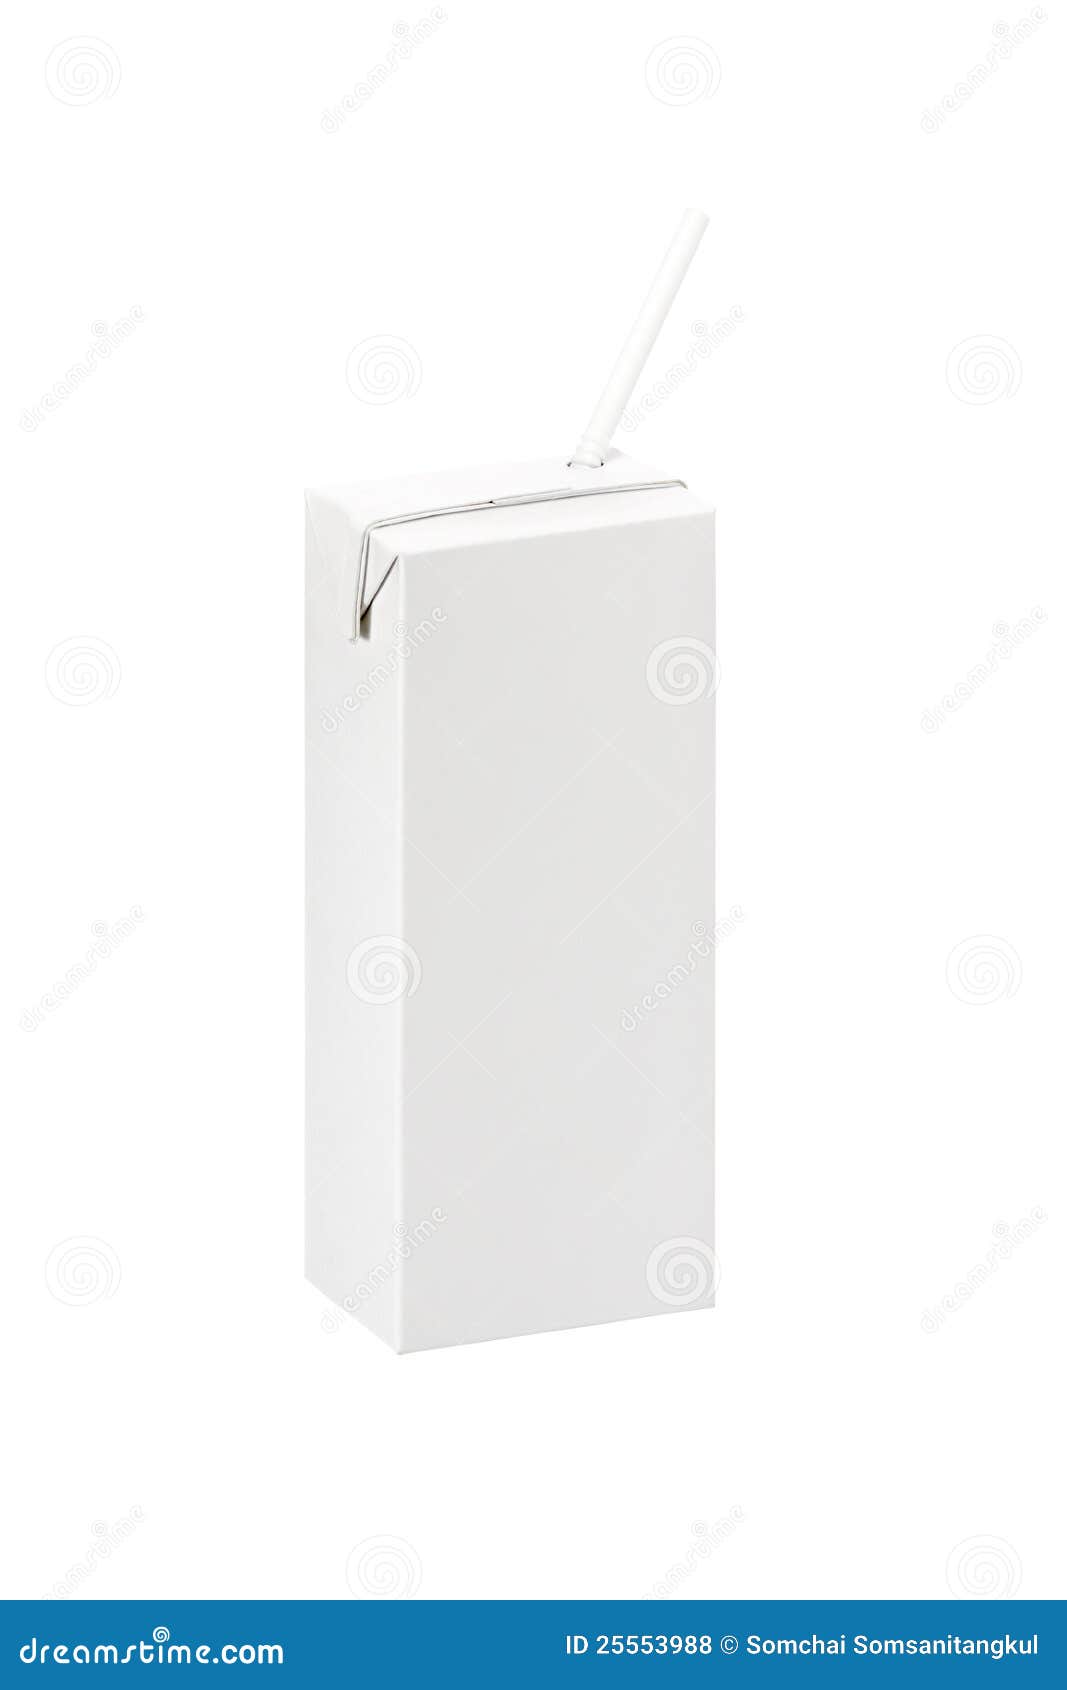 Royalty Free Stock Photos: Blank pack box of Milk or juice with straw